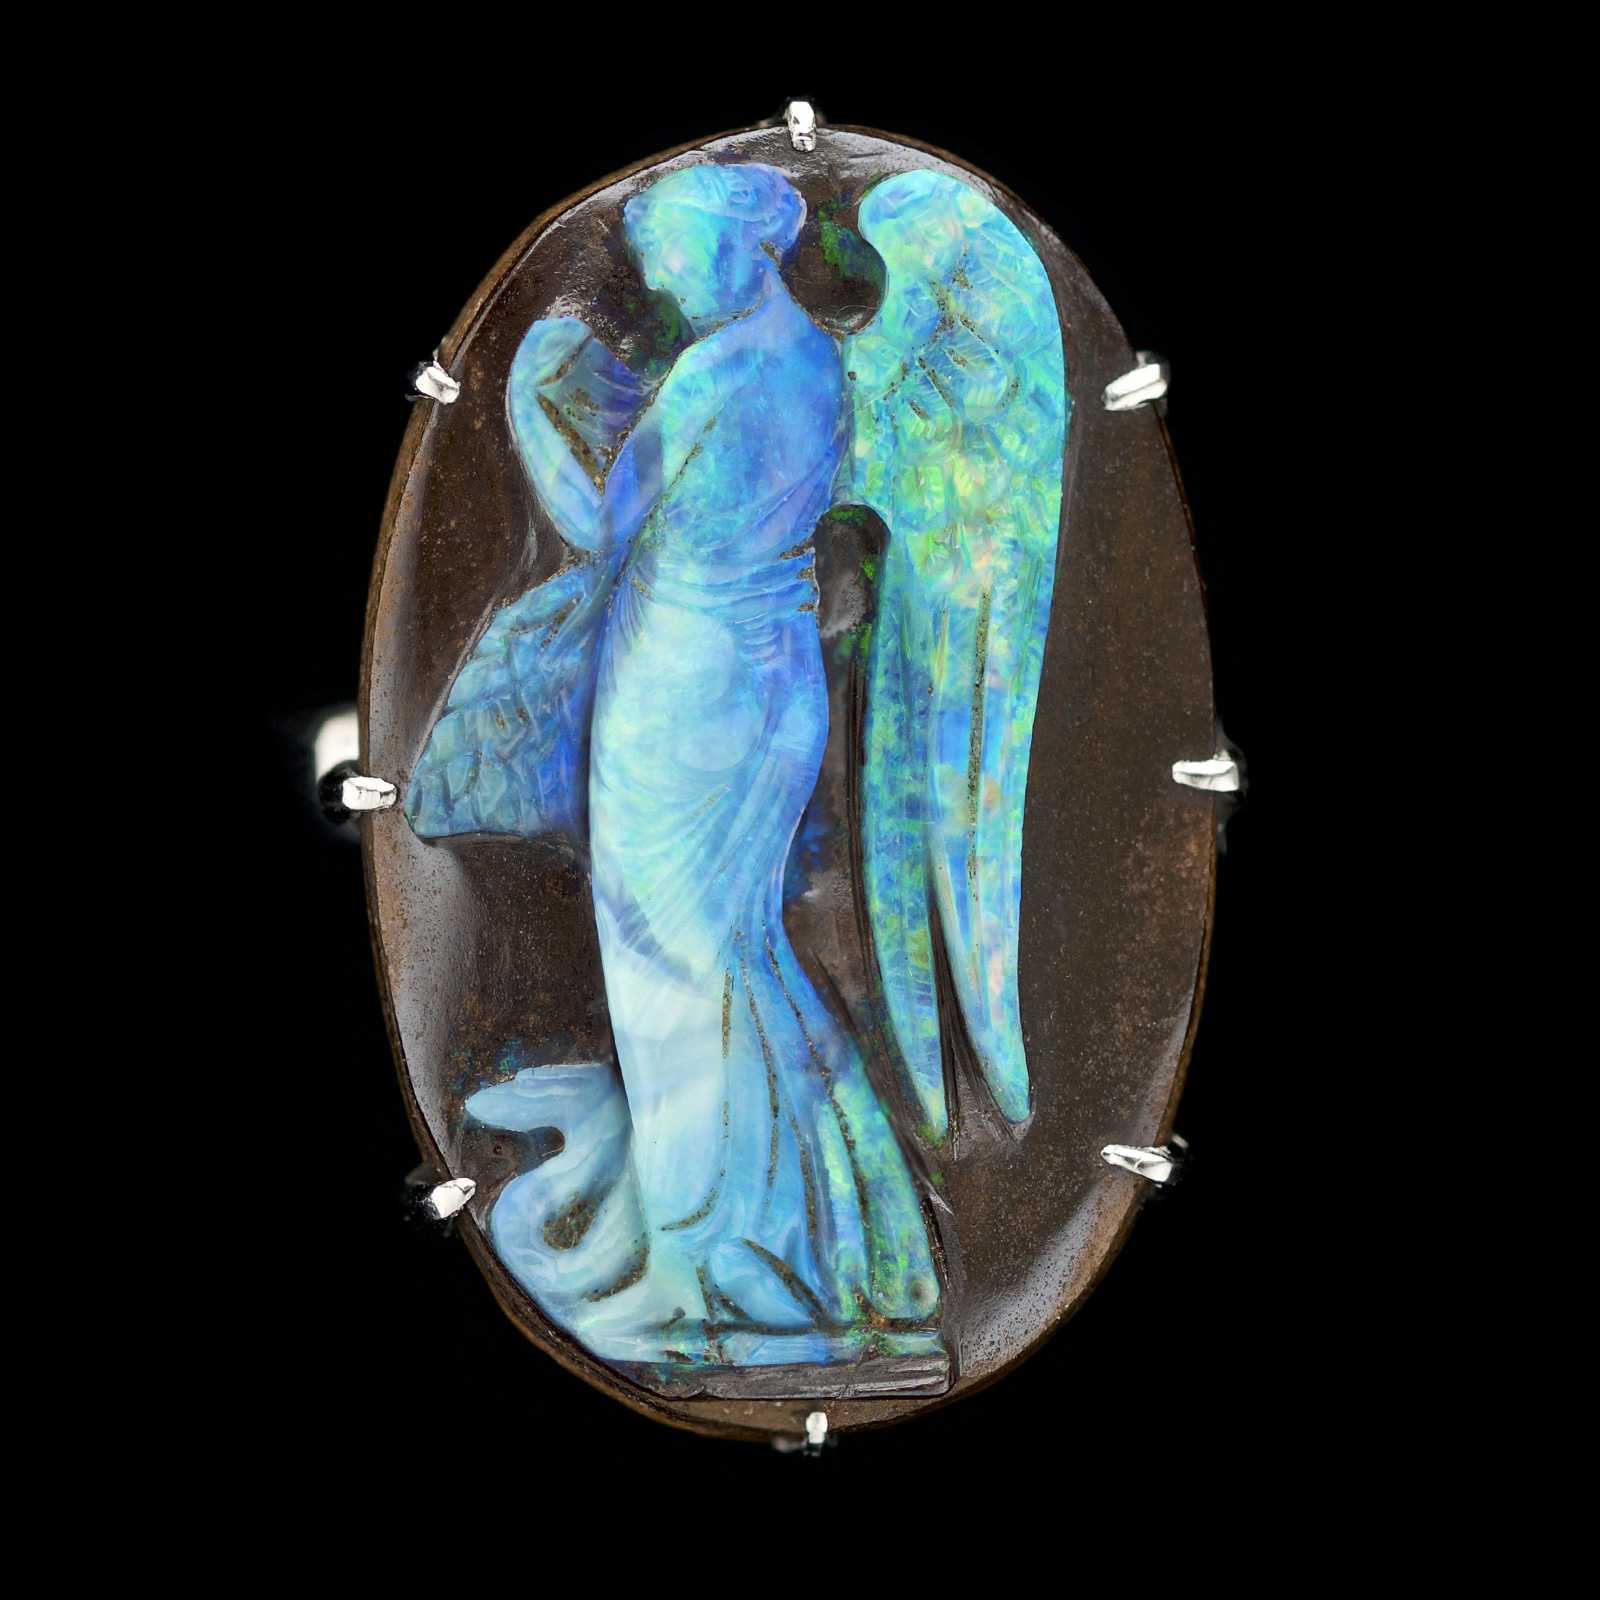 Extremely rare opal cameo set in silver as a ring